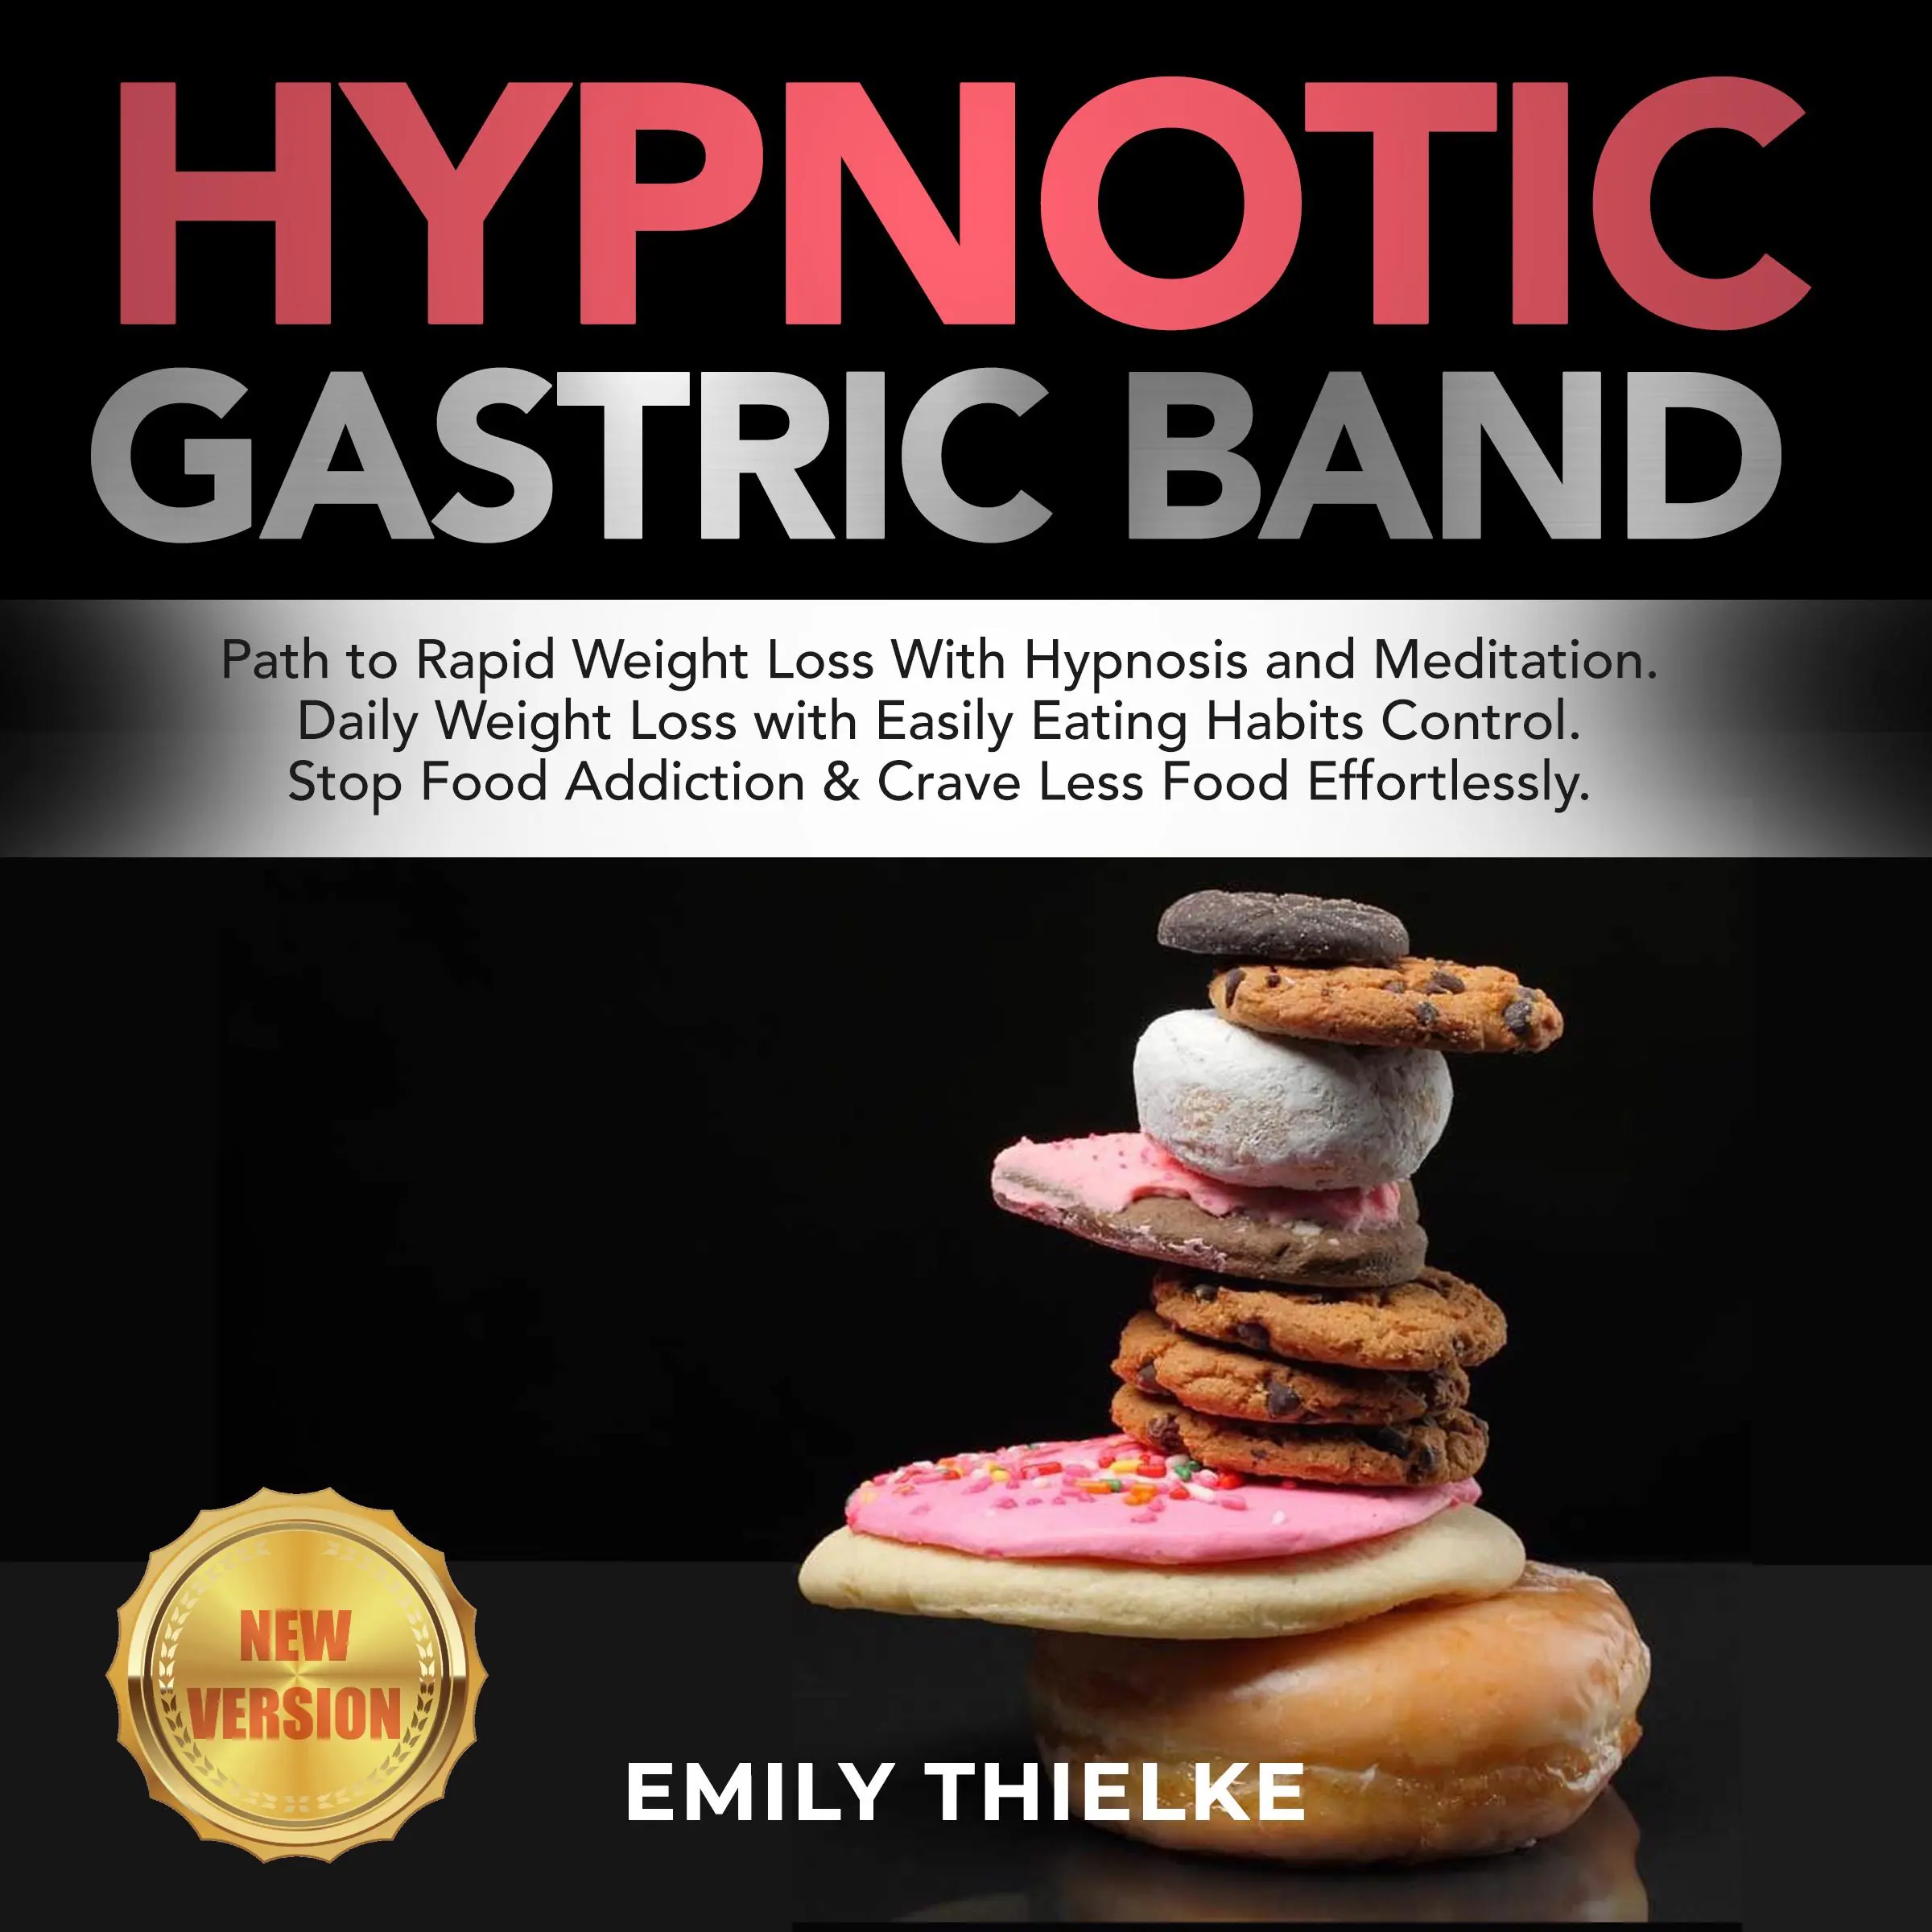 HYPNOTIC GASTRIC BAND: Path to Rapid Weight Loss With Hypnosis and Meditation. Daily Weight Loss with Easily Eating Habits Control. Stop Food Addiction & Crave Less Food Effortlessly. NEW VERSION Audiobook by EMILY THIELKE